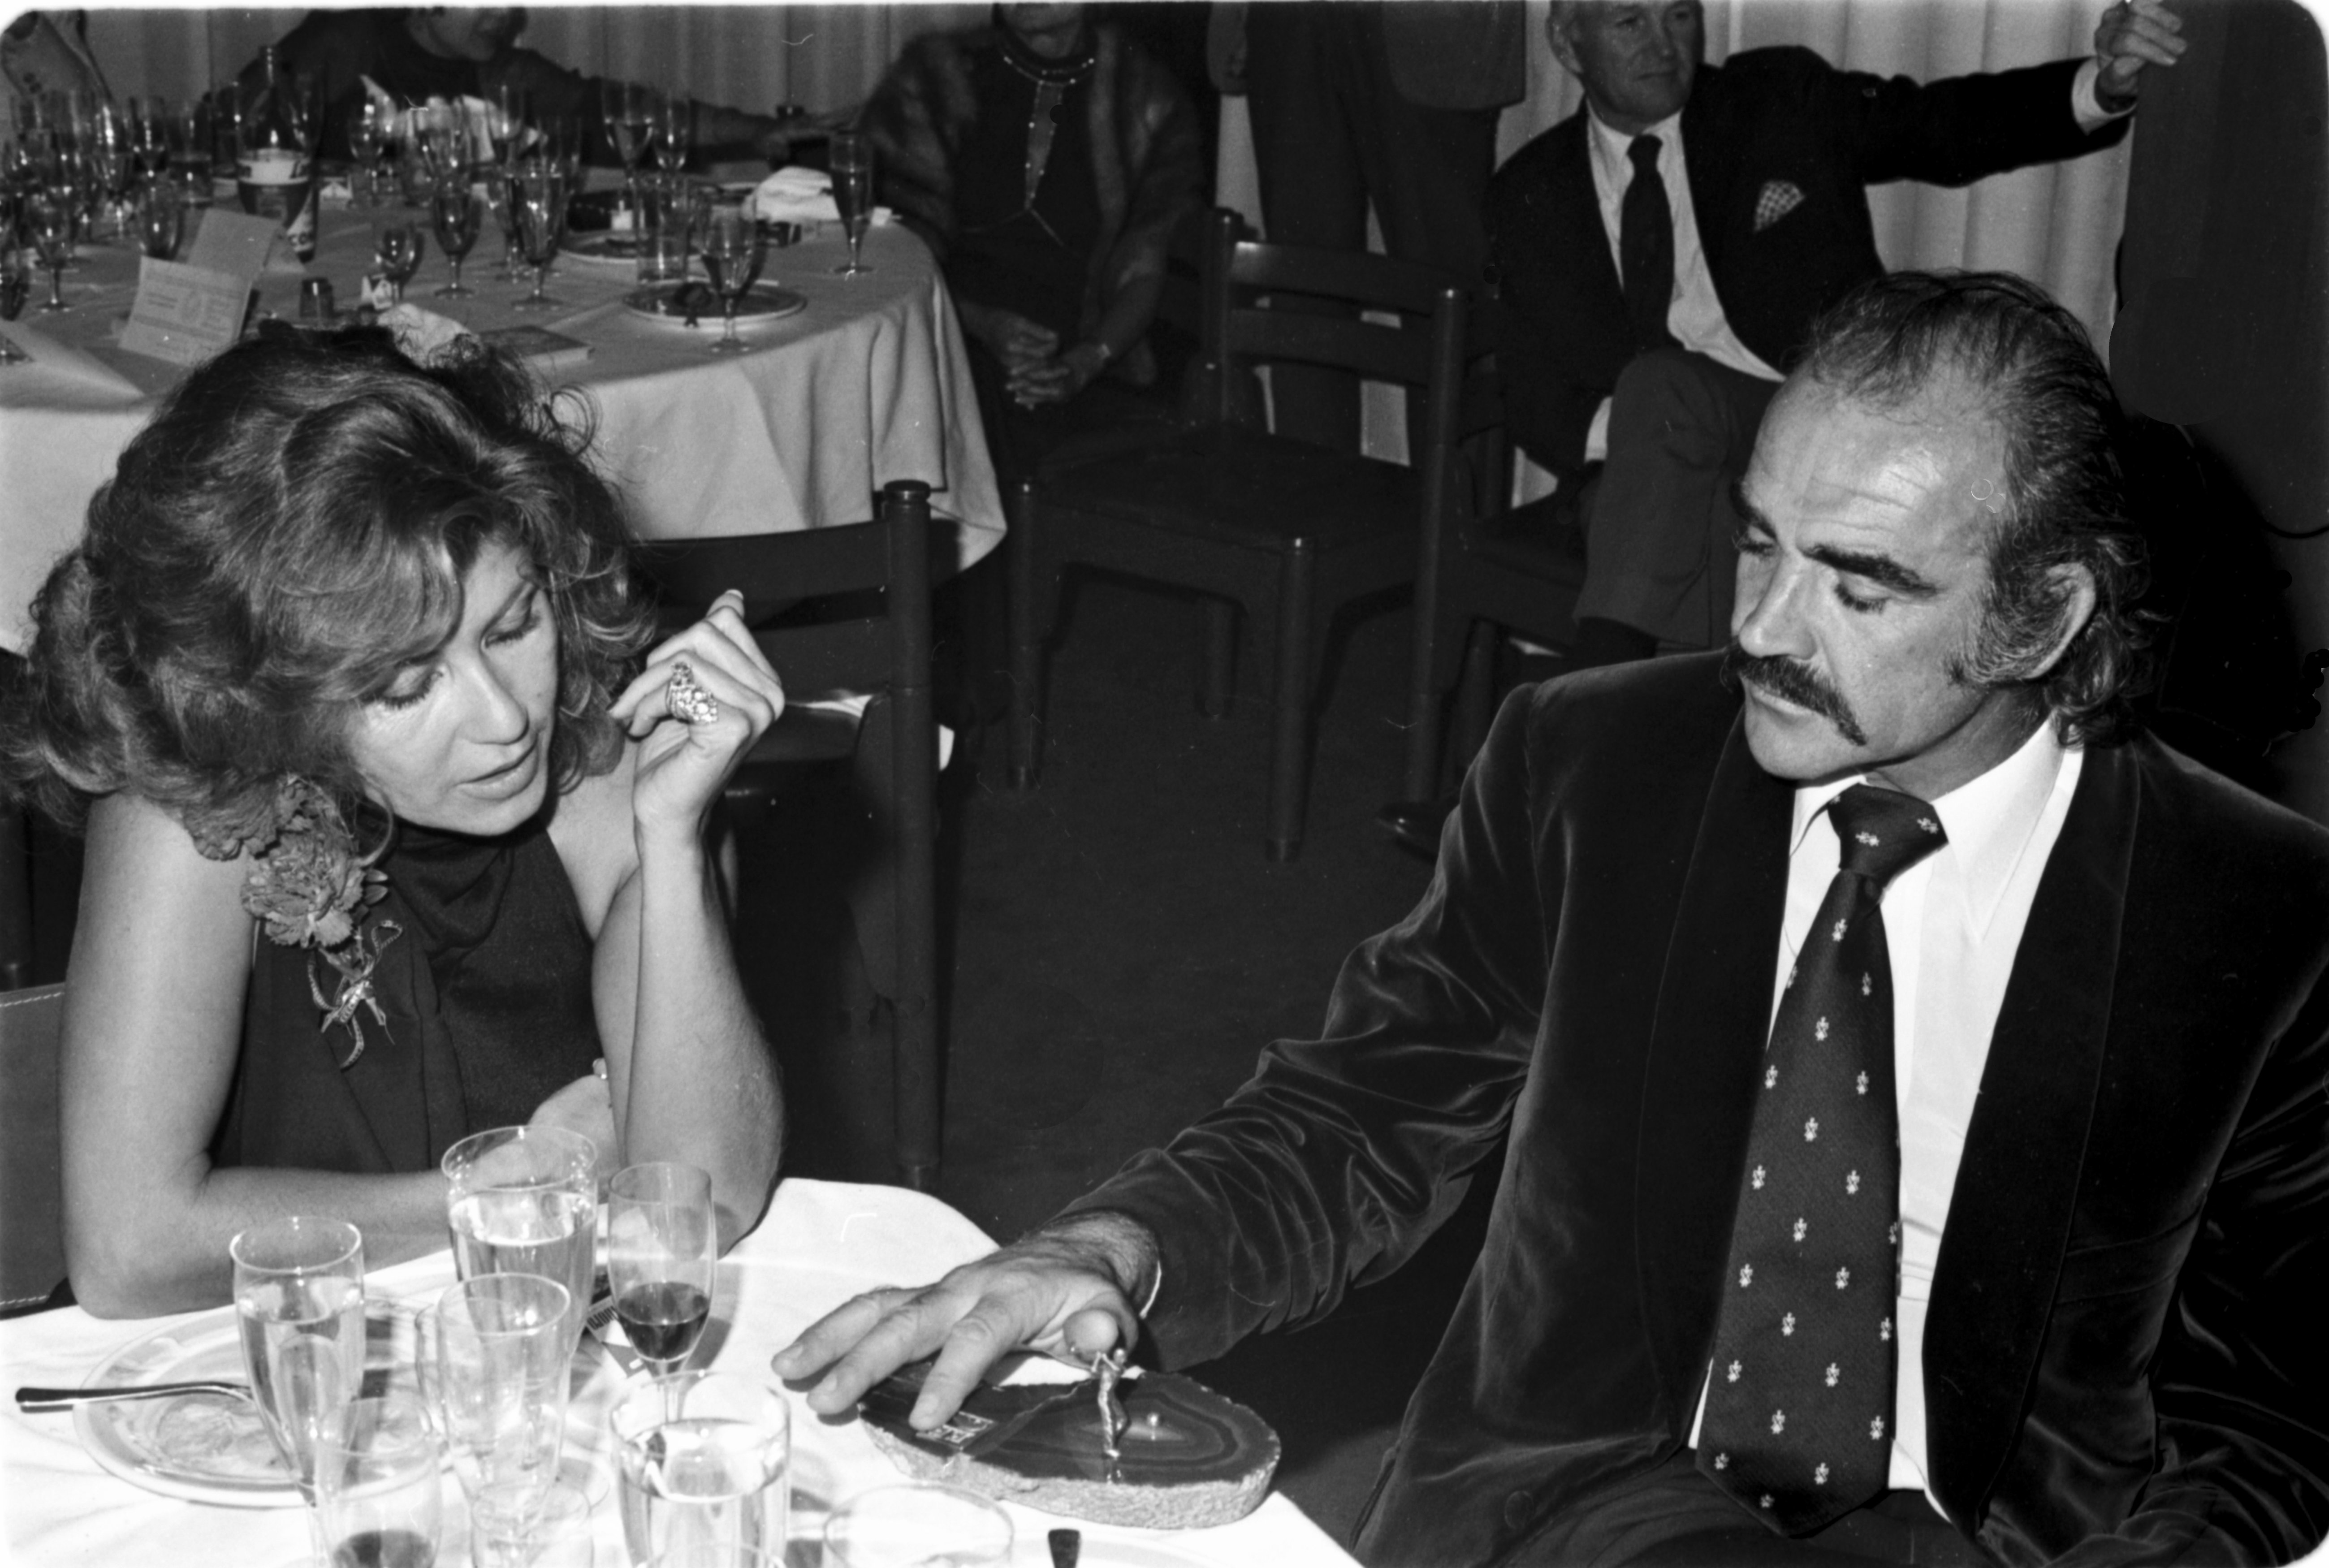 Sean Connery pictured in the restaurant of the golf of "La Manga del Mar Menor" with his wife Micheline Roquebrune in 1973, Murcia, Spain. / Source: Getty Images